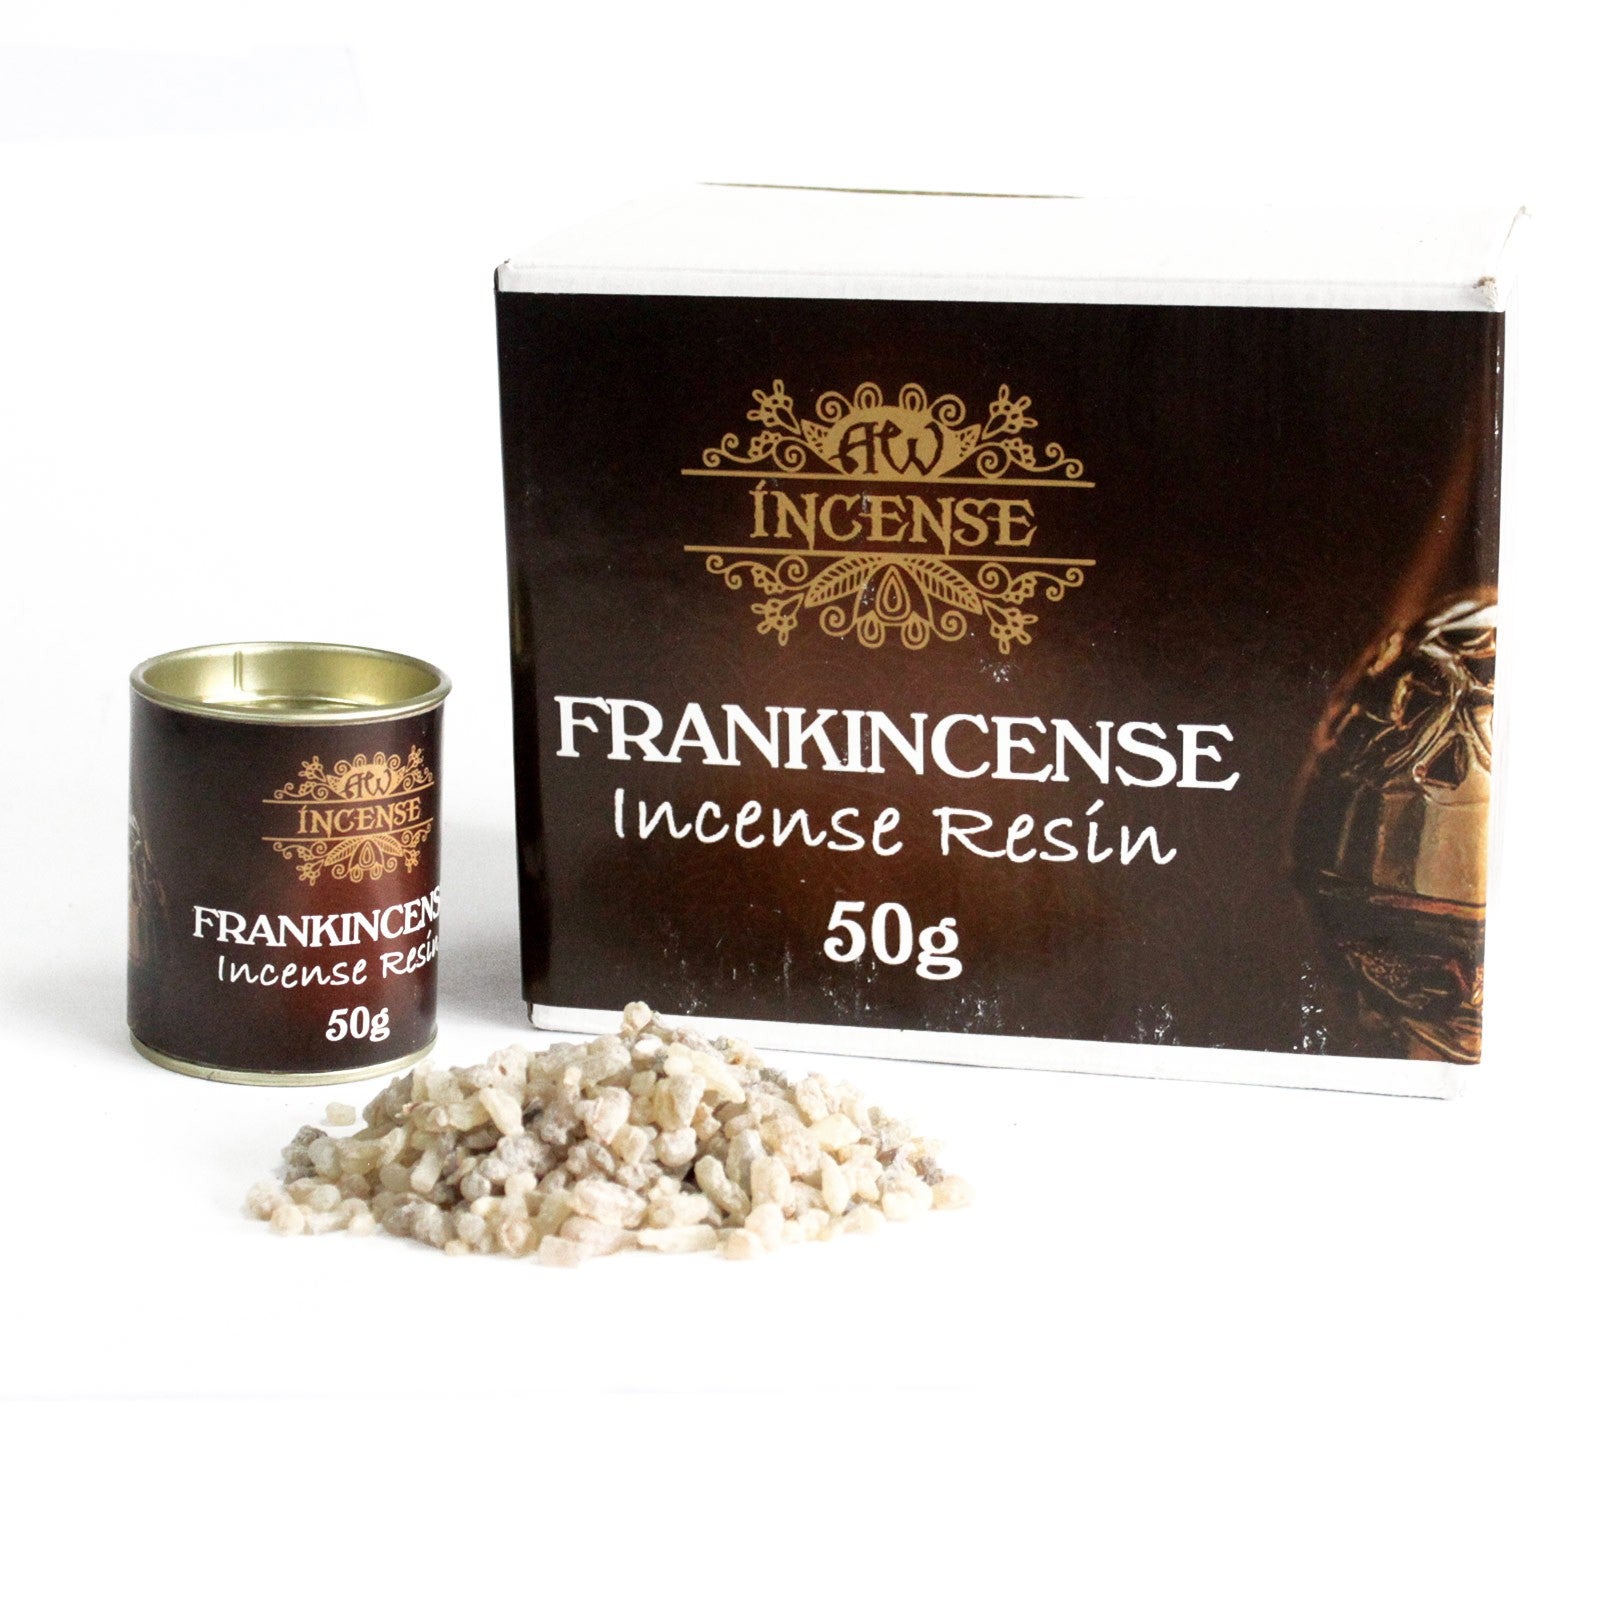 View 50gm Frankincense Resin information